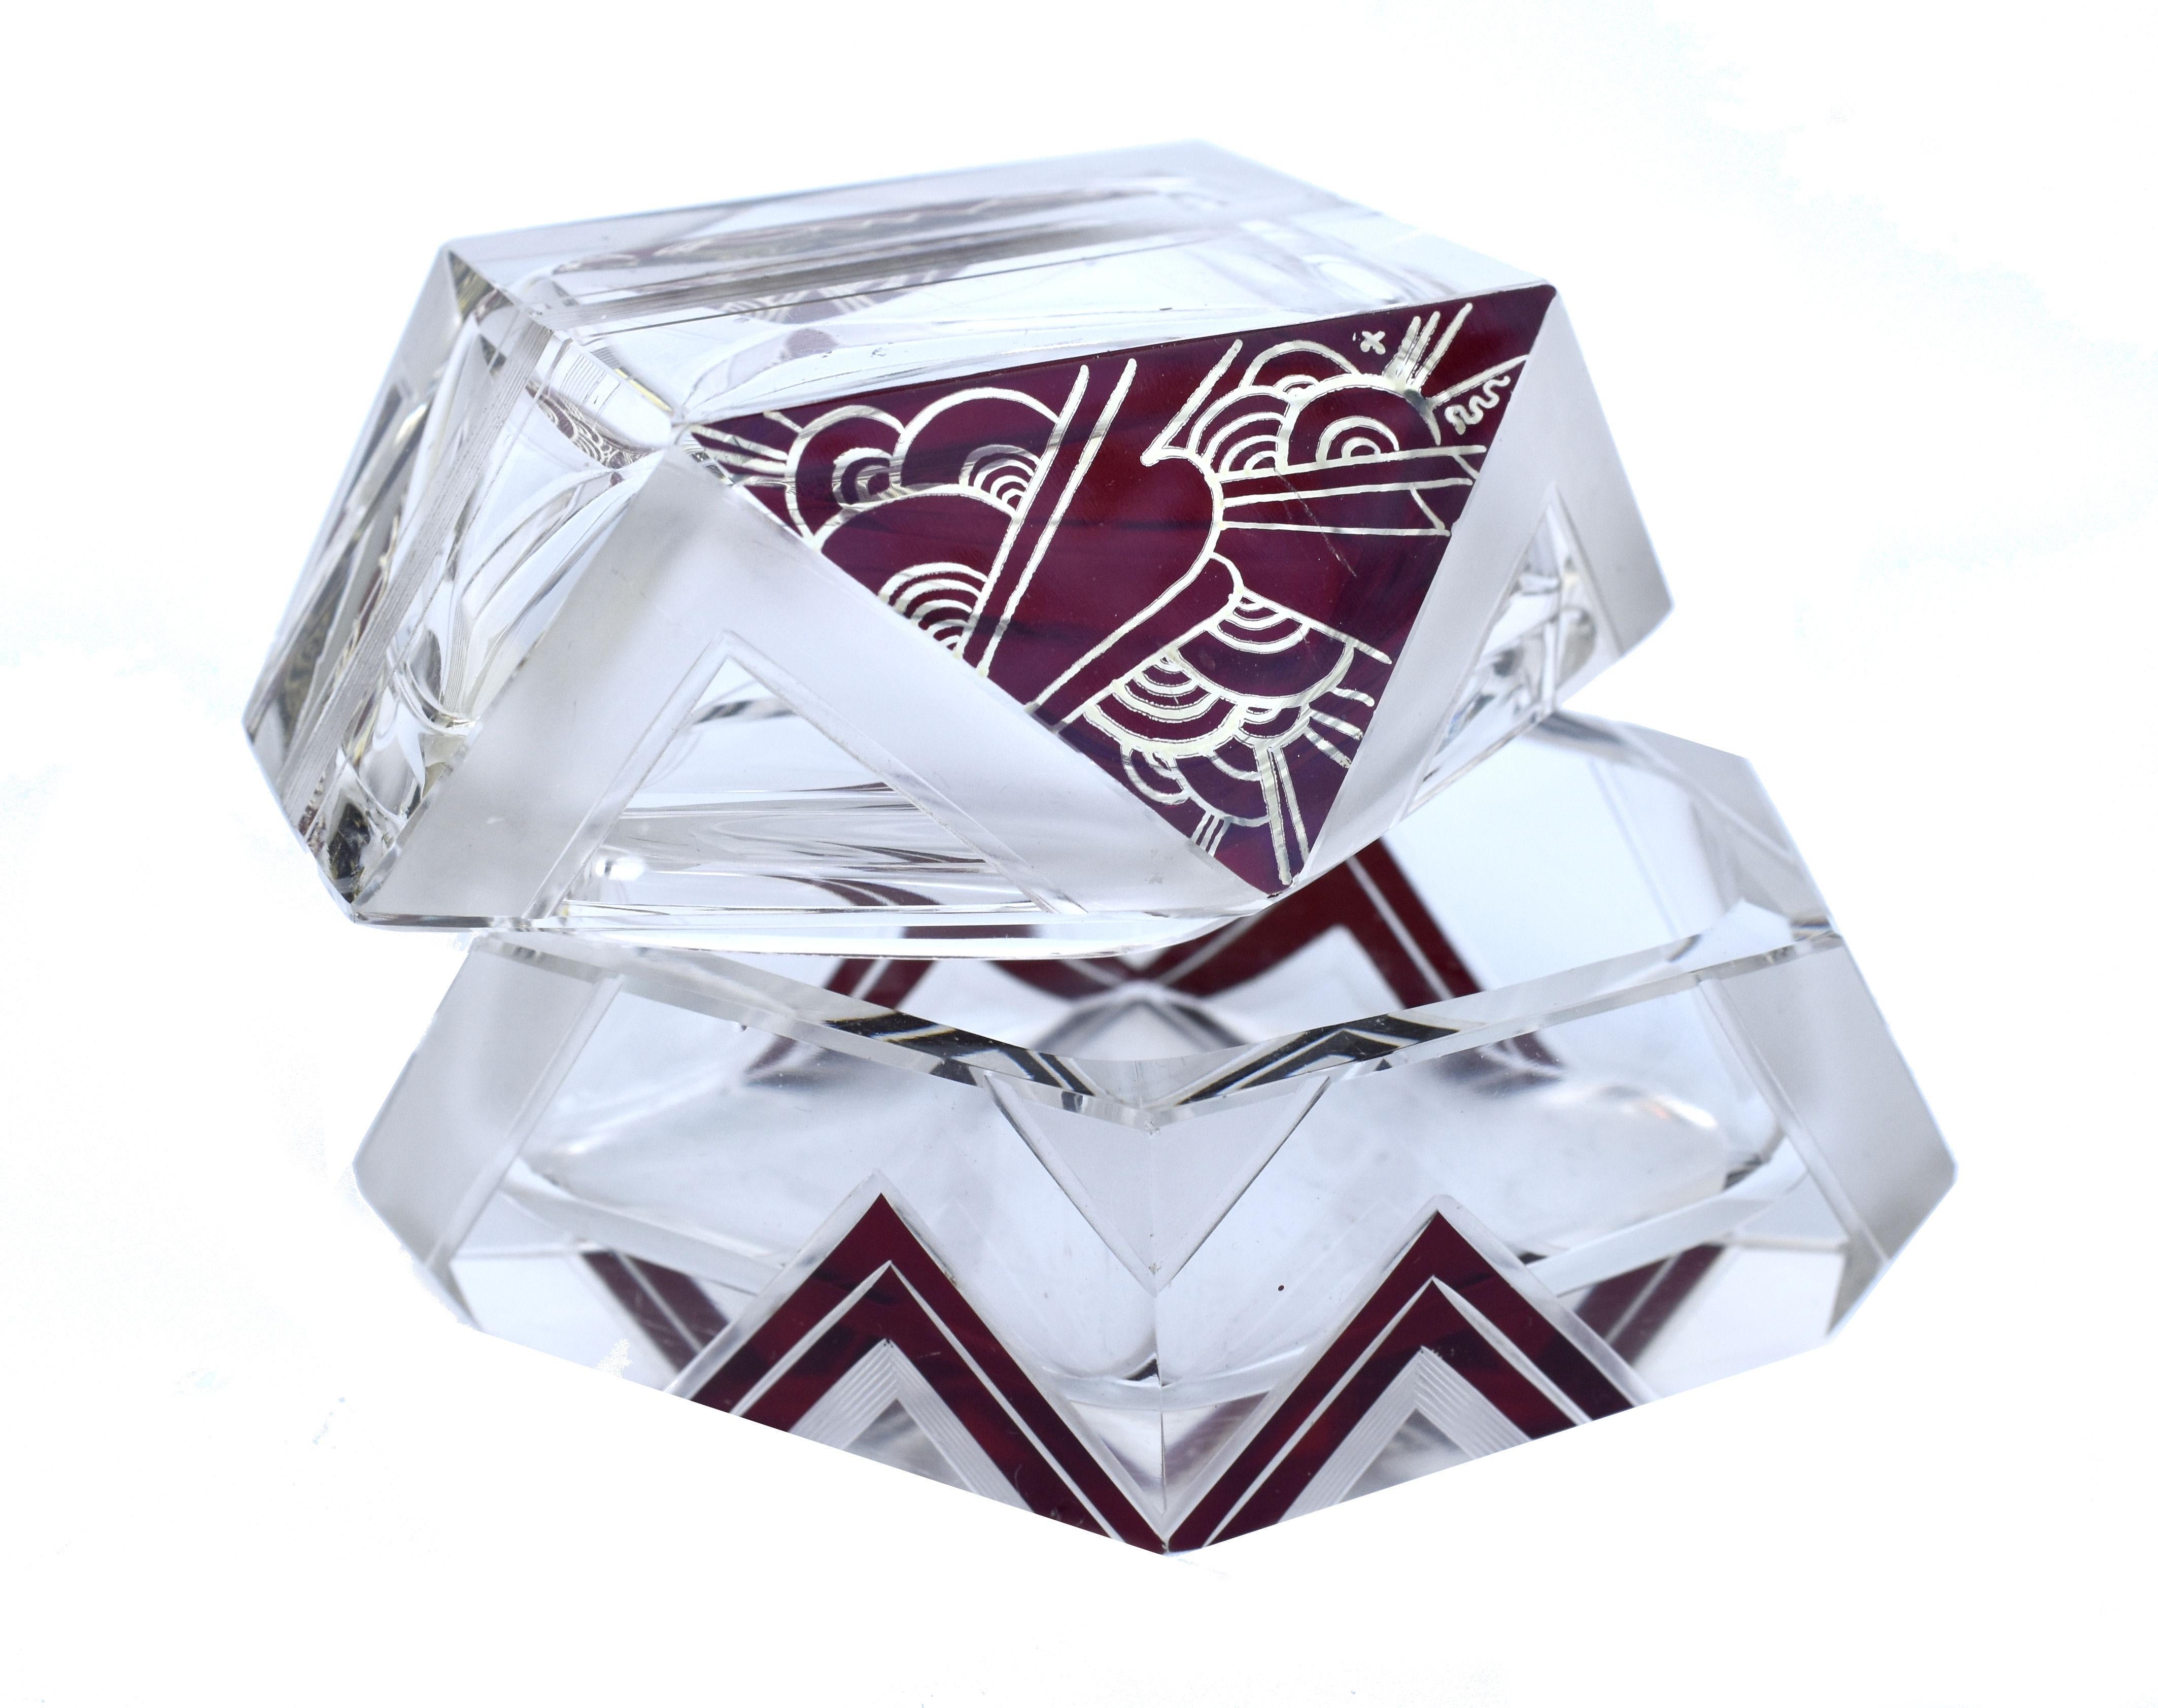 Stunning Art Deco heavy cut glass trinket/ powder box by Karl Palda. Beautiful patterning, very collectable dating from the 1930s. Czech in origin. Superb ruby coloured enamelled geometric design with etched glass detailing. Thoroughly checked over